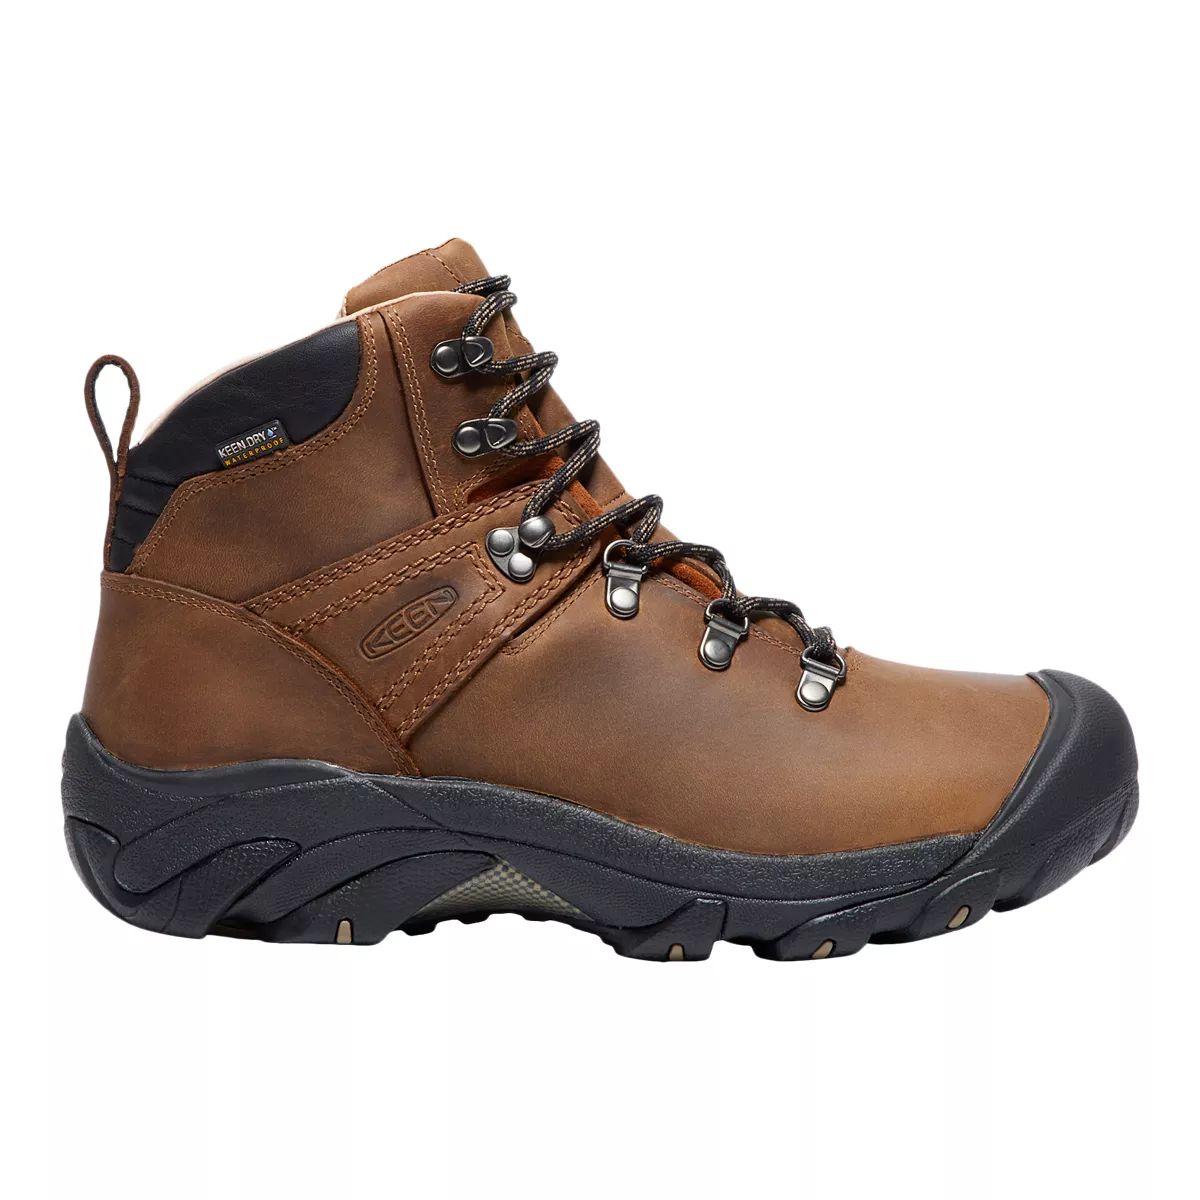 Image of Keen Men's Pyrenees Waterproof Leather Hiking Boots